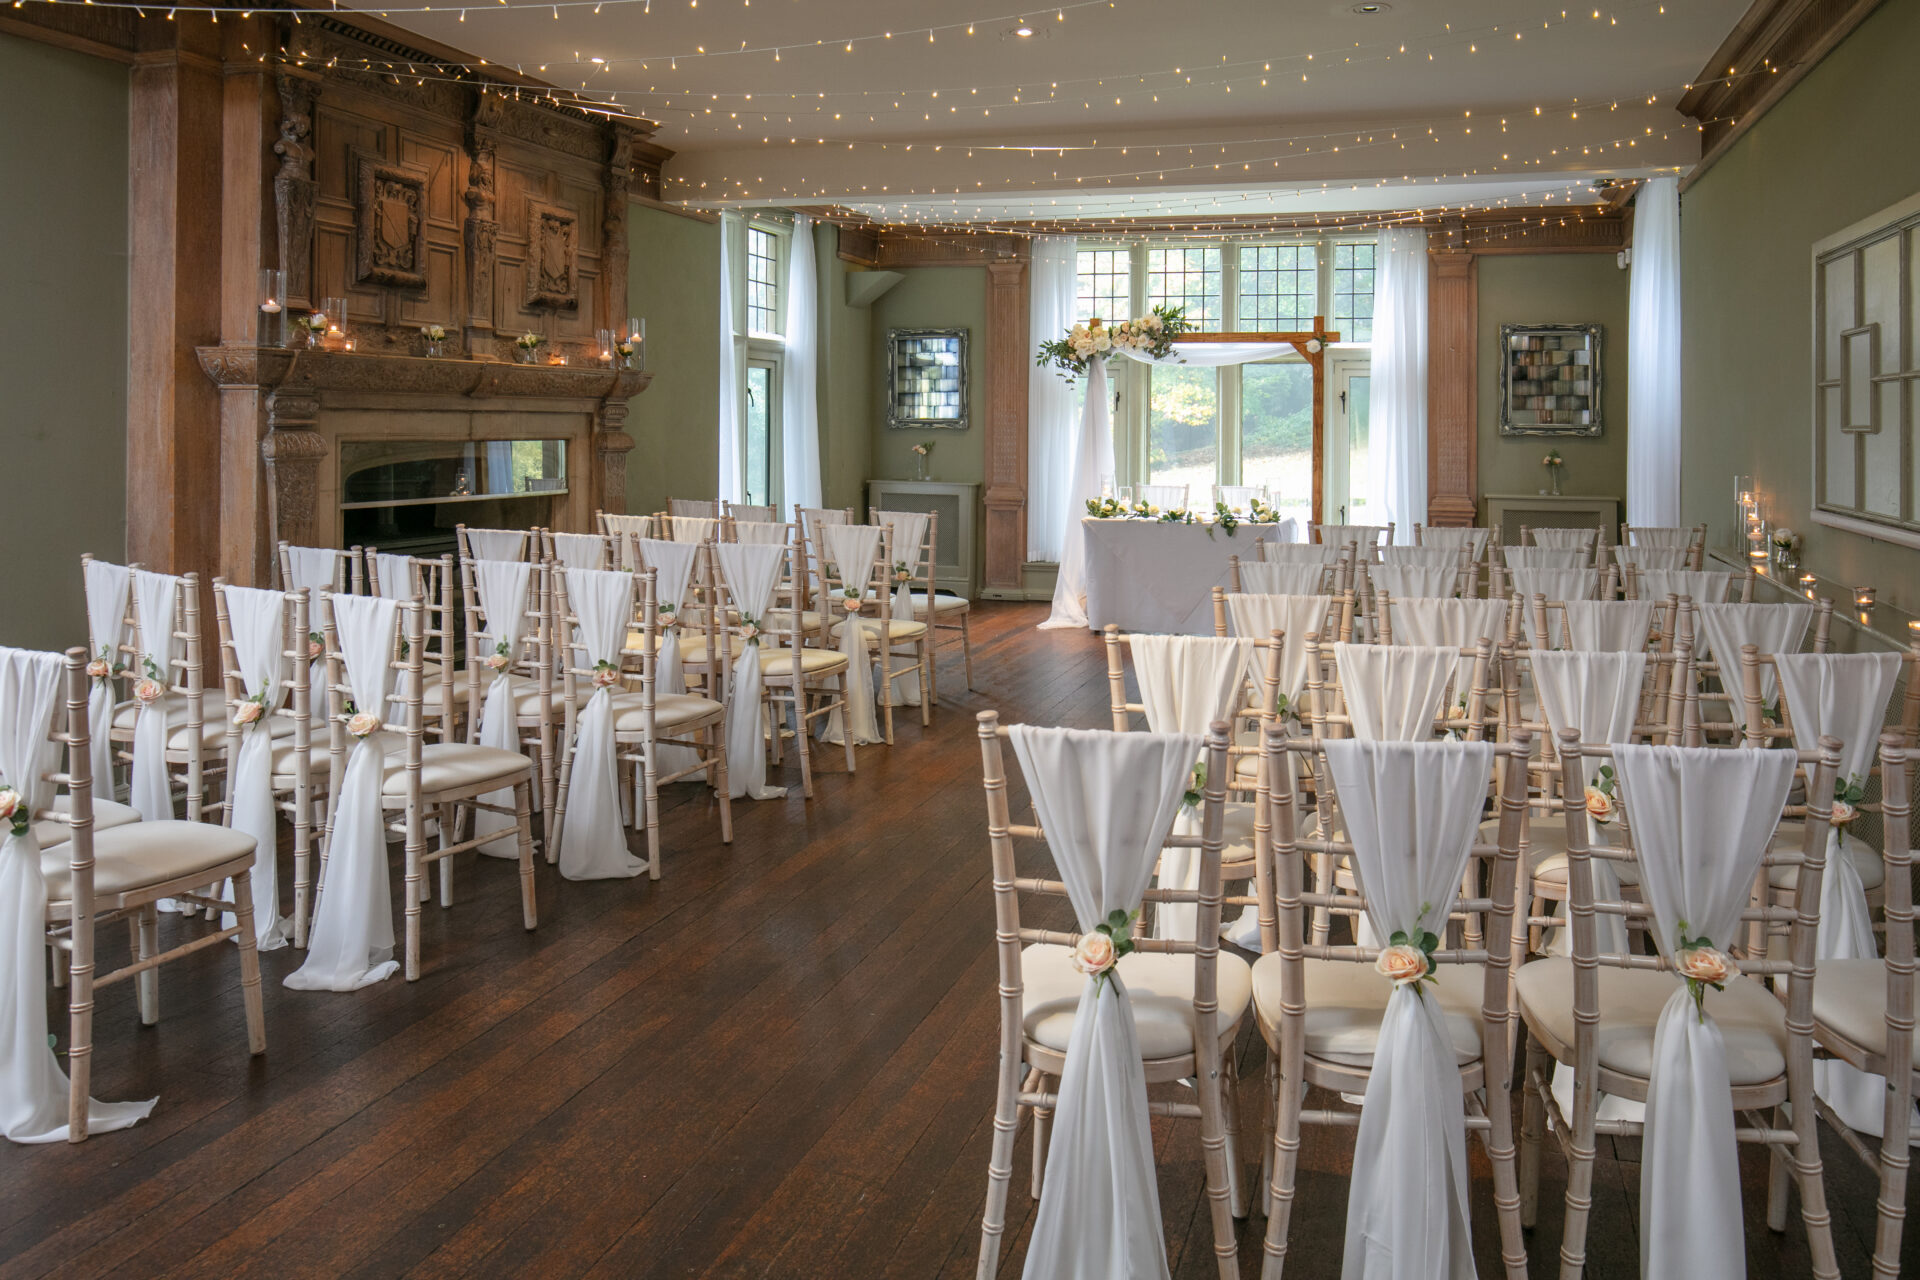 The perfect venue for your big day!